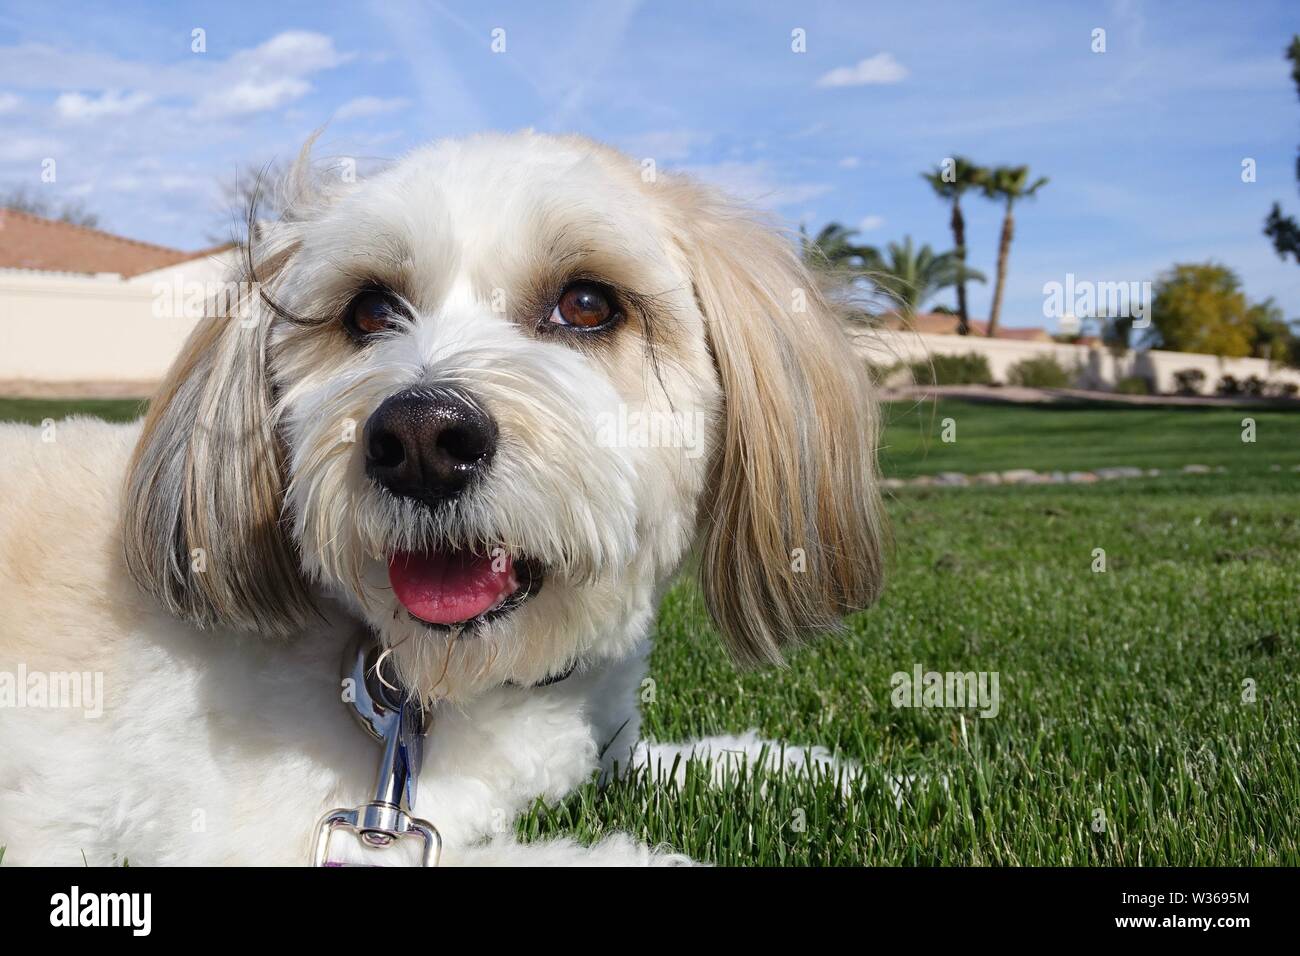 A dog looks away while going for a walk. Stock Photo